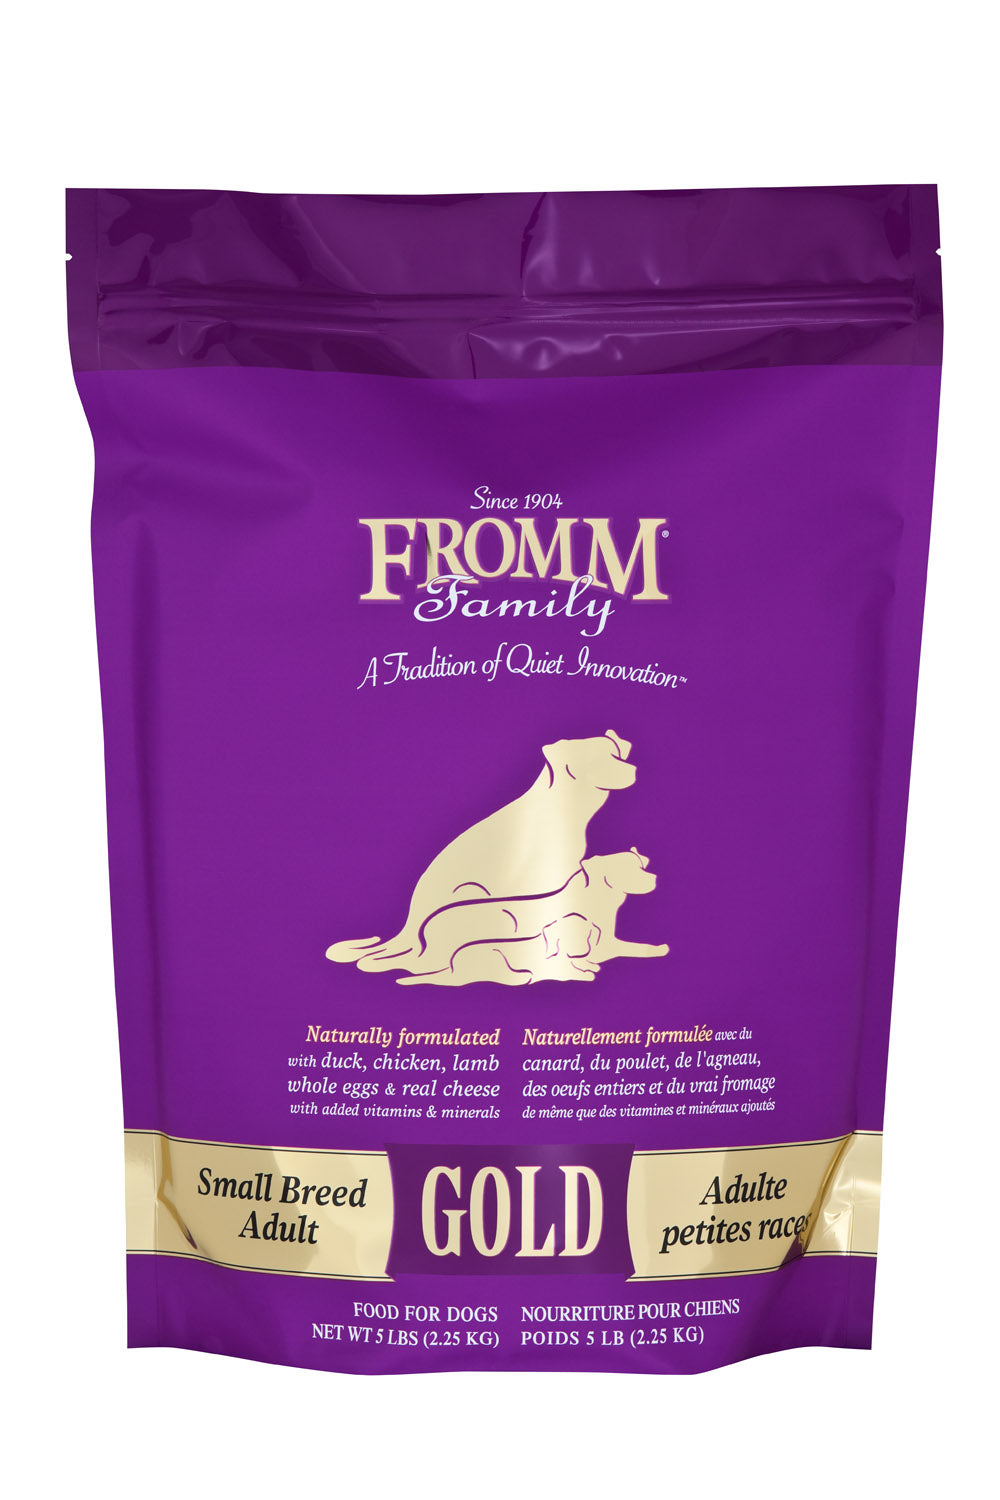 Fromm Family Gold Small Breed Adult Dog Food